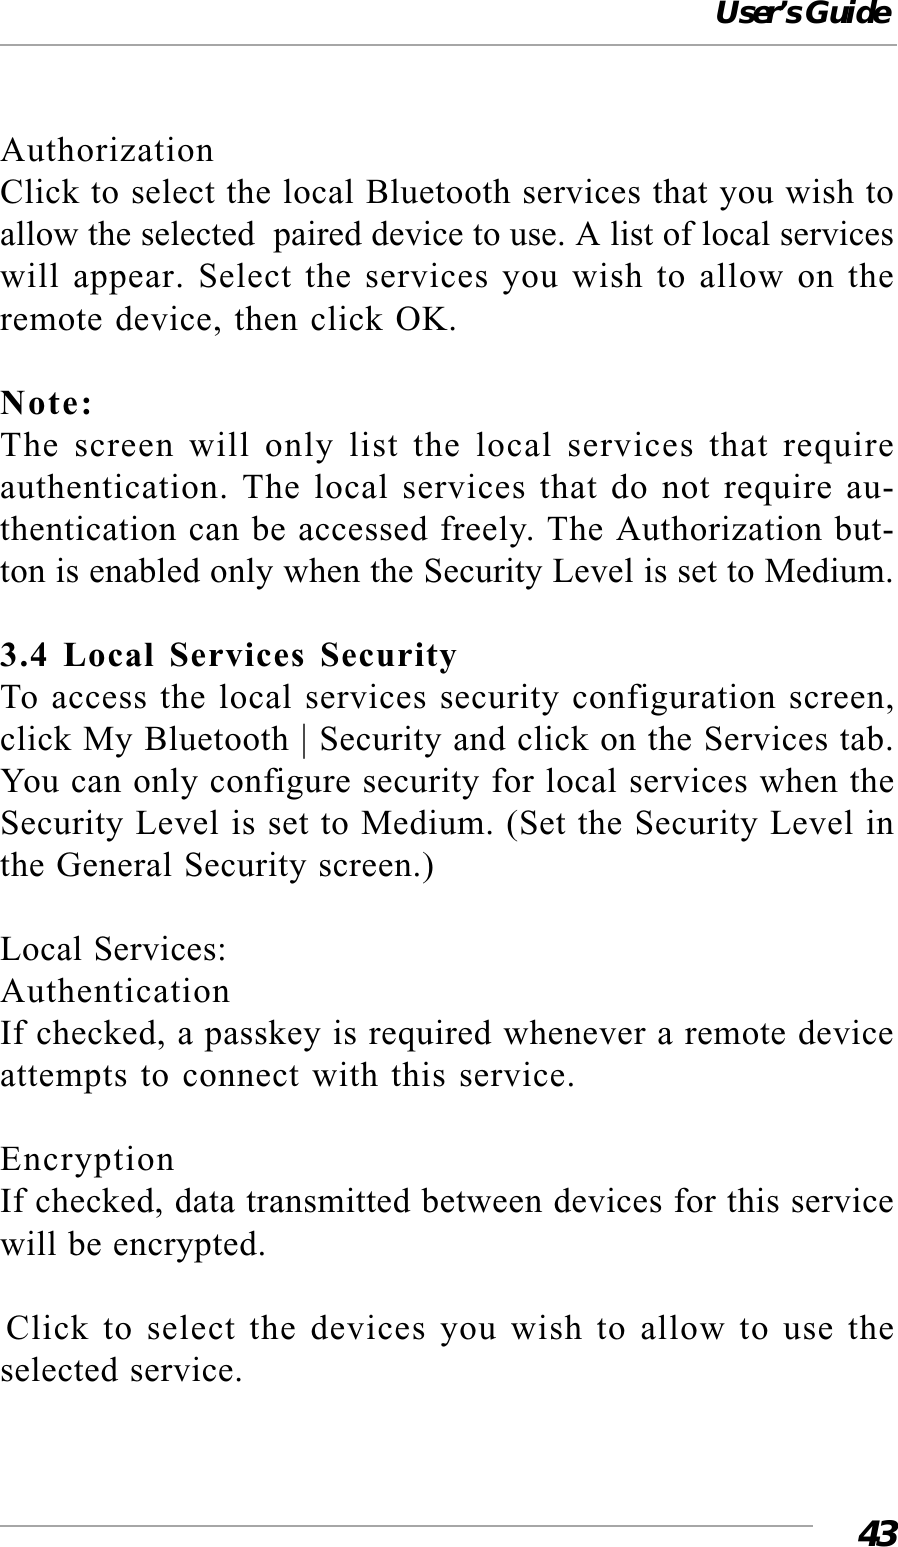 User’s Guide43AuthorizationClick to select the local Bluetooth services that you wish toallow the selected  paired device to use. A list of local serviceswill appear. Select the services you wish to allow on theremote device, then click OK.Note:The screen will only list the local services that requireauthentication. The local services that do not require au-thentication can be accessed freely. The Authorization but-ton is enabled only when the Security Level is set to Medium.3.4 Local Services SecurityTo access the local services security configuration screen,click My Bluetooth | Security and click on the Services tab.You can only configure security for local services when theSecurity Level is set to Medium. (Set the Security Level inthe General Security screen.)Local Services:AuthenticationIf checked, a passkey is required whenever a remote deviceattempts to connect with this service.EncryptionIf checked, data transmitted between devices for this servicewill be encrypted.Click to select the devices you wish to allow to use theselected service.